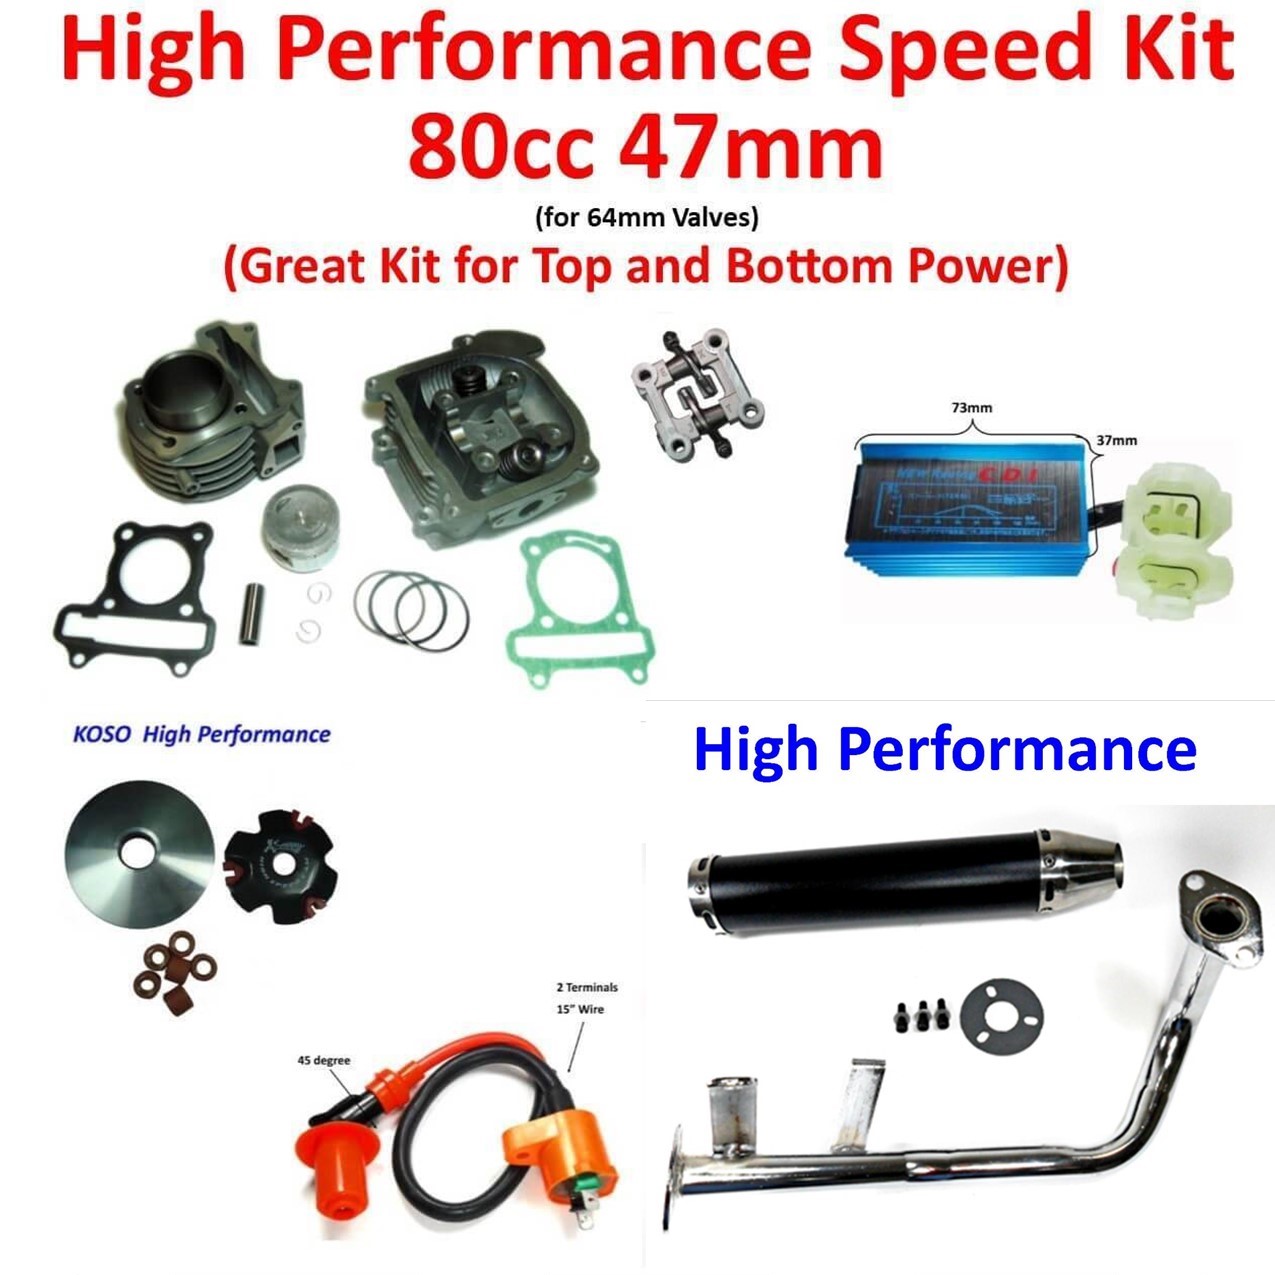 High Performance Speed Kit GY6-80cc (47mm). Comes with all parts shown.